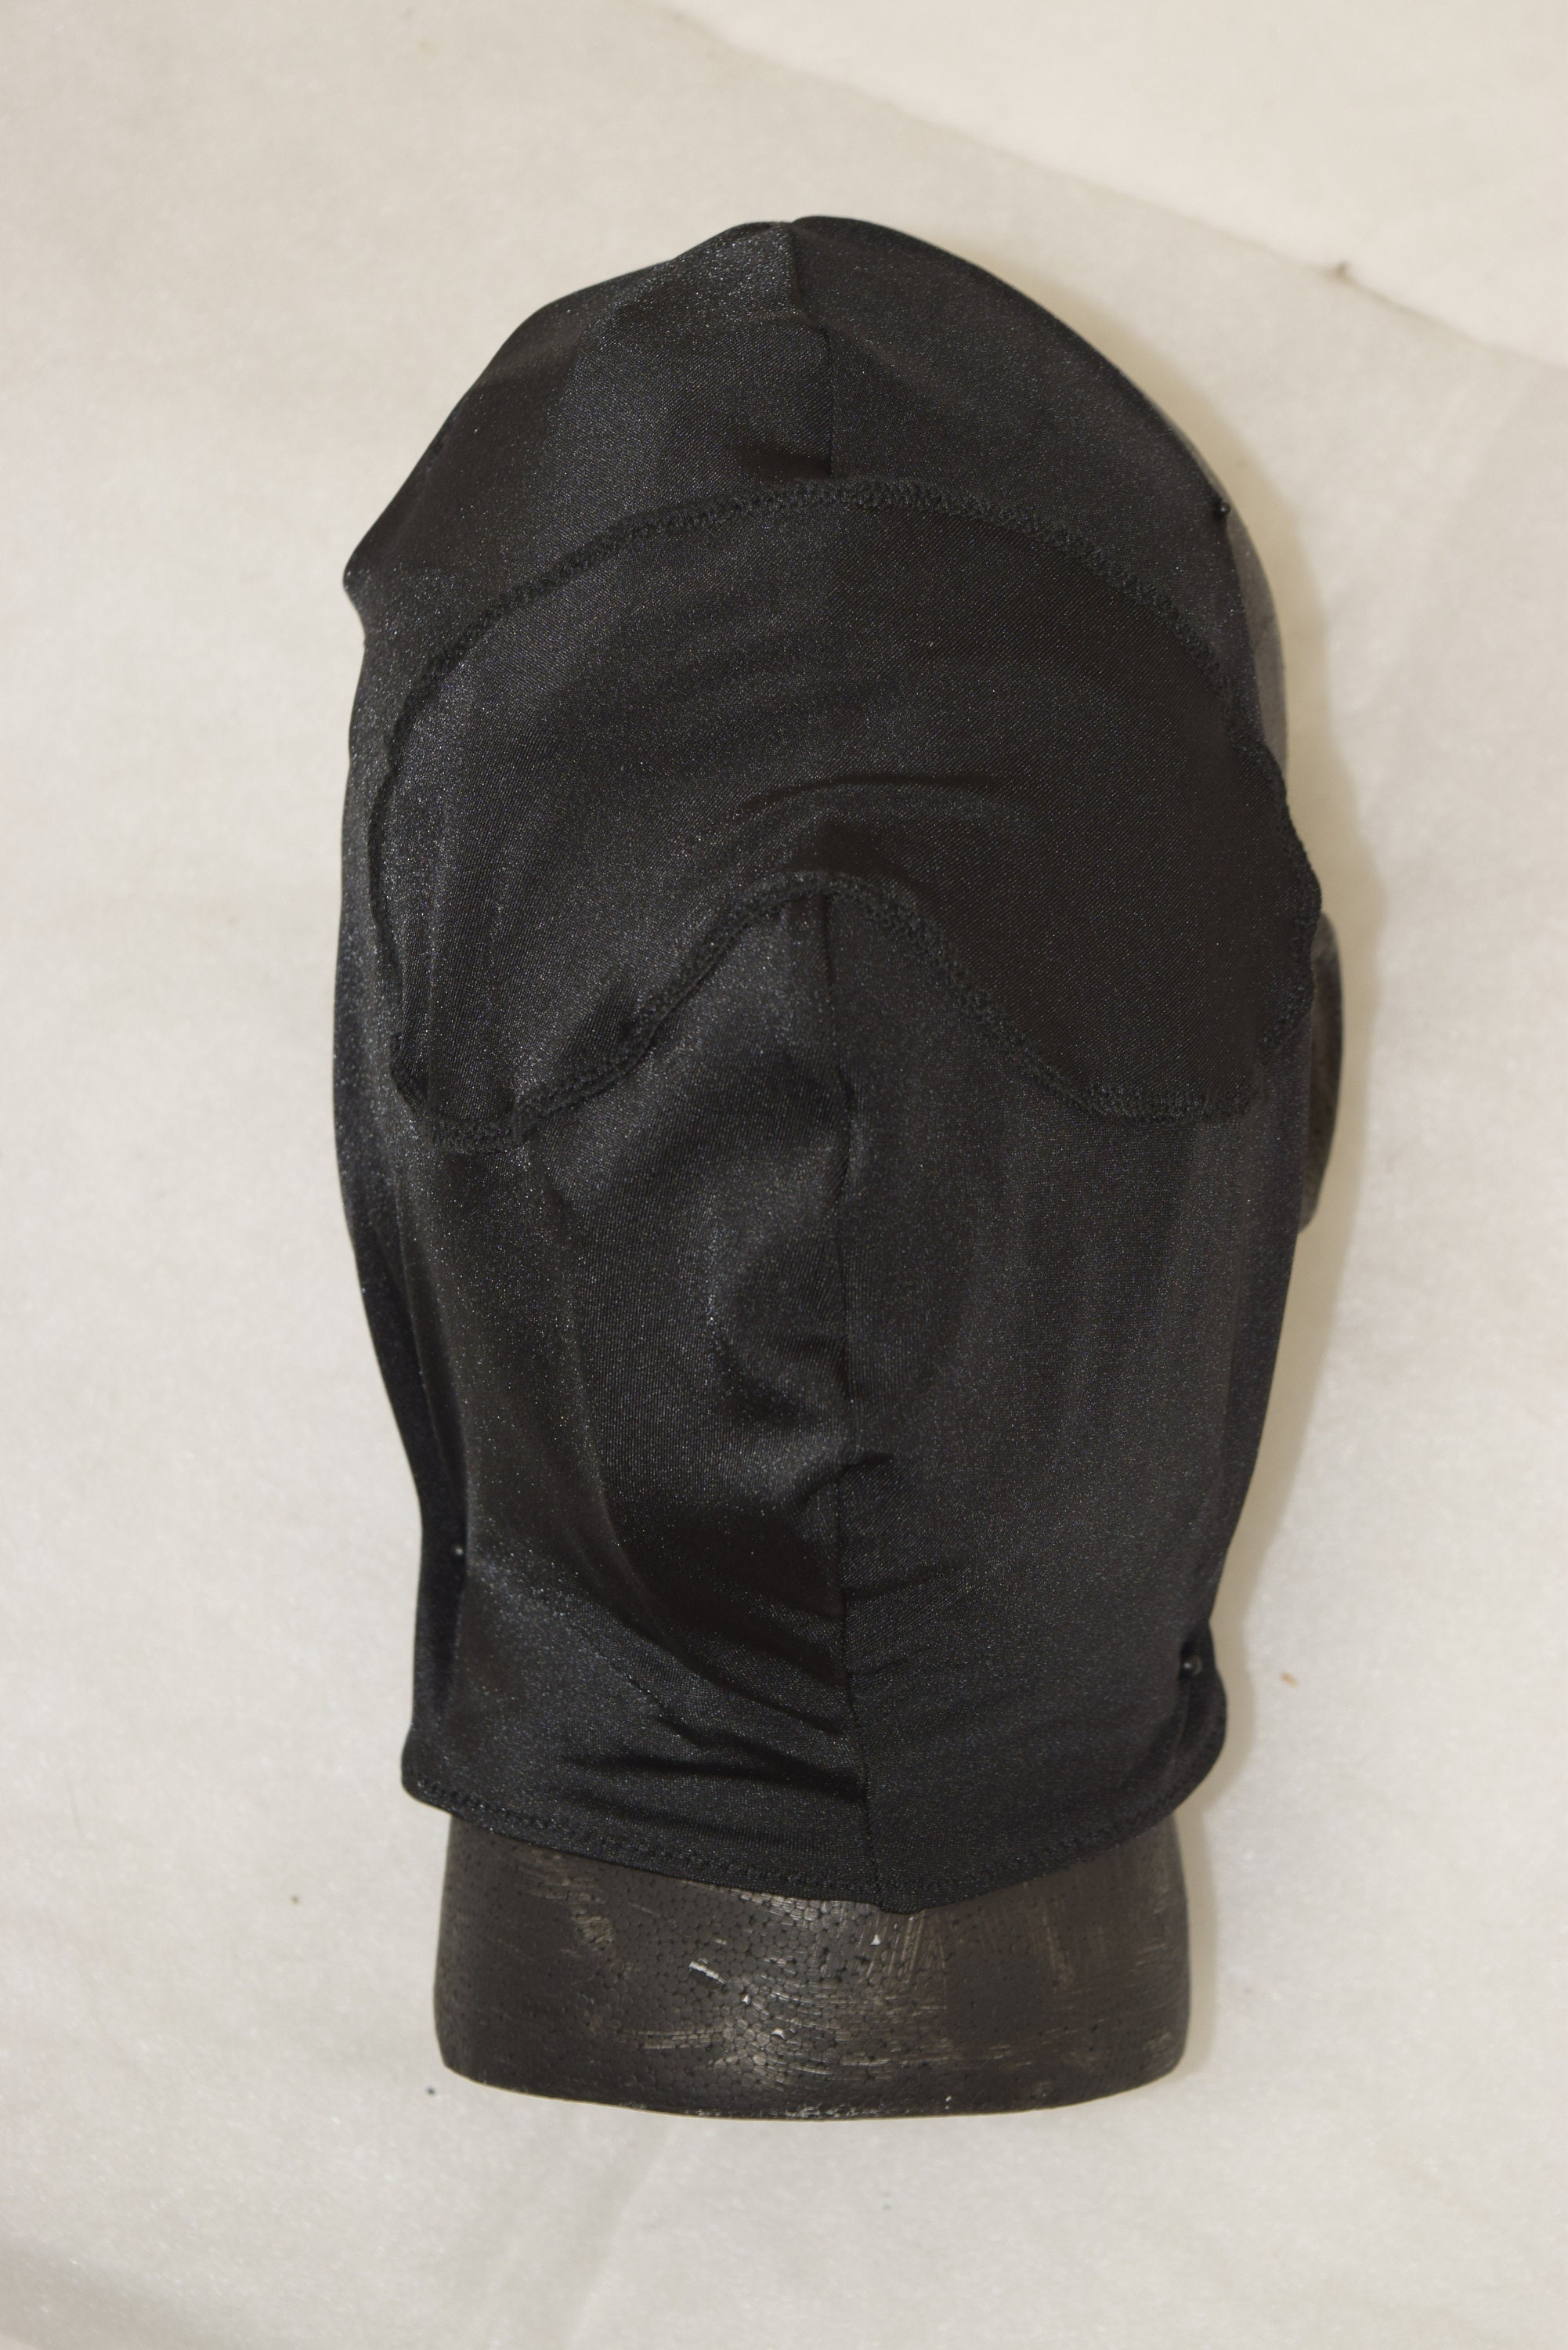 Nylon/ Lycra Spandex Hood With Attached Blindfold - Etsy